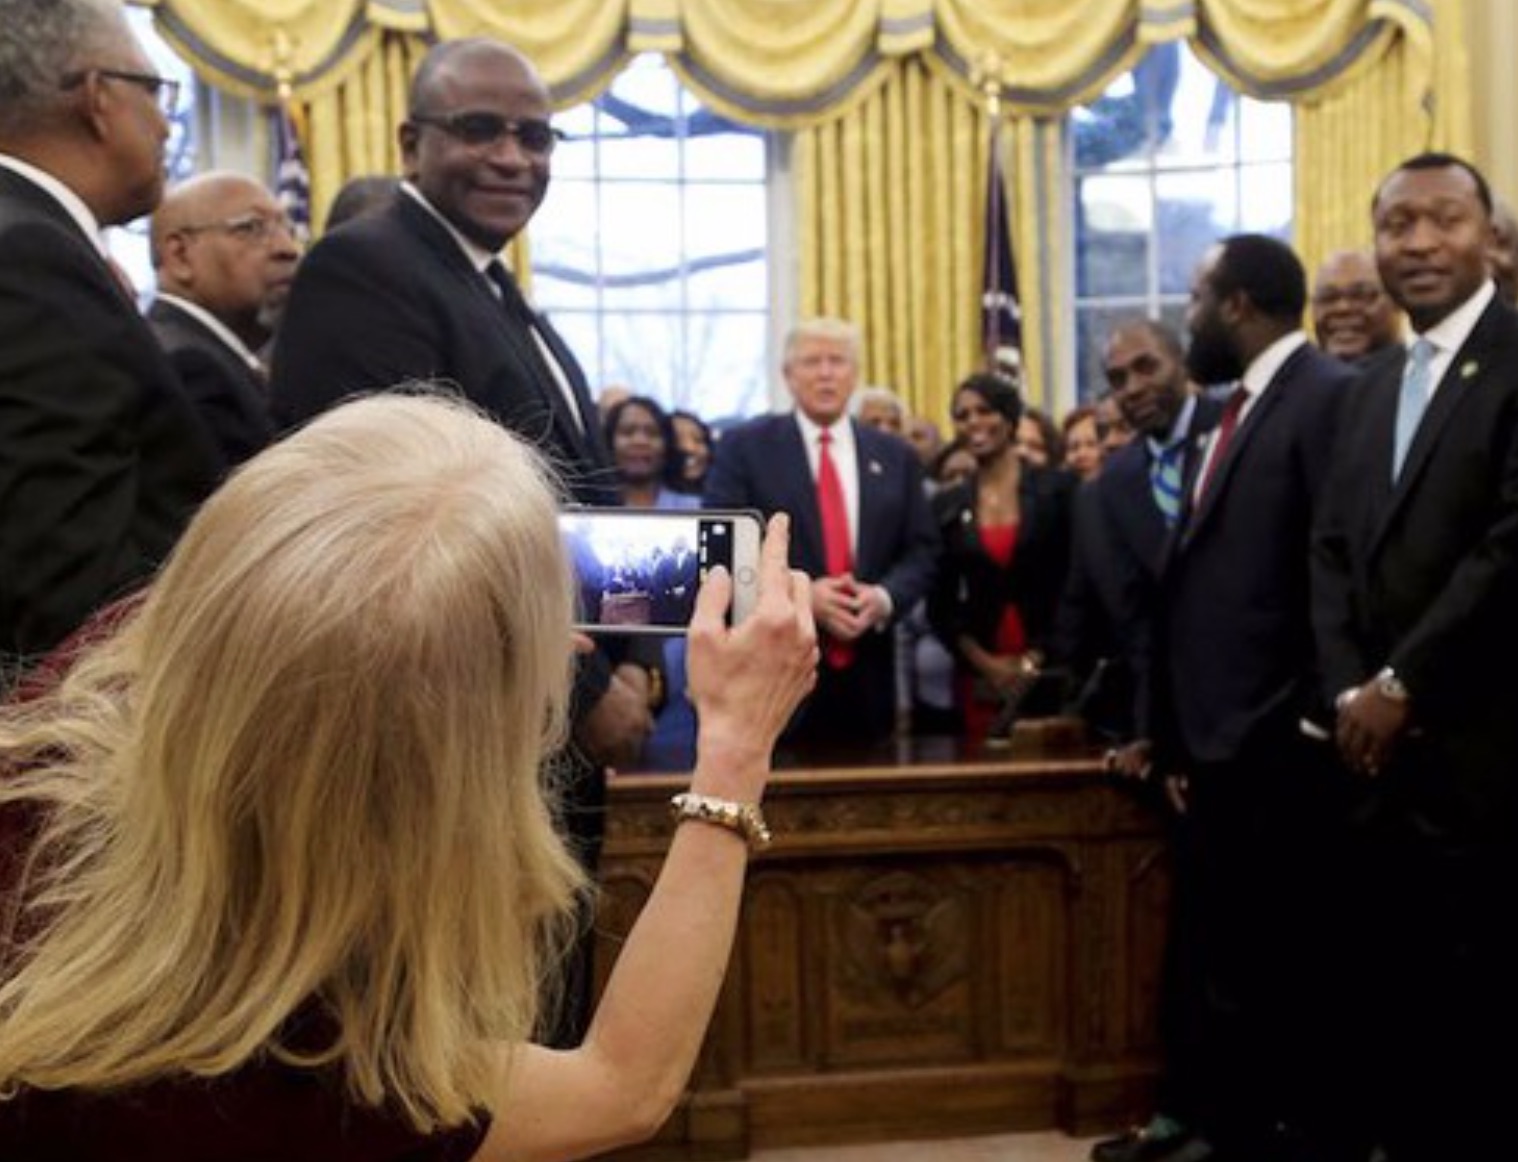 So, Who WAS Kellyanne Taking That Couch Gate Photo For??